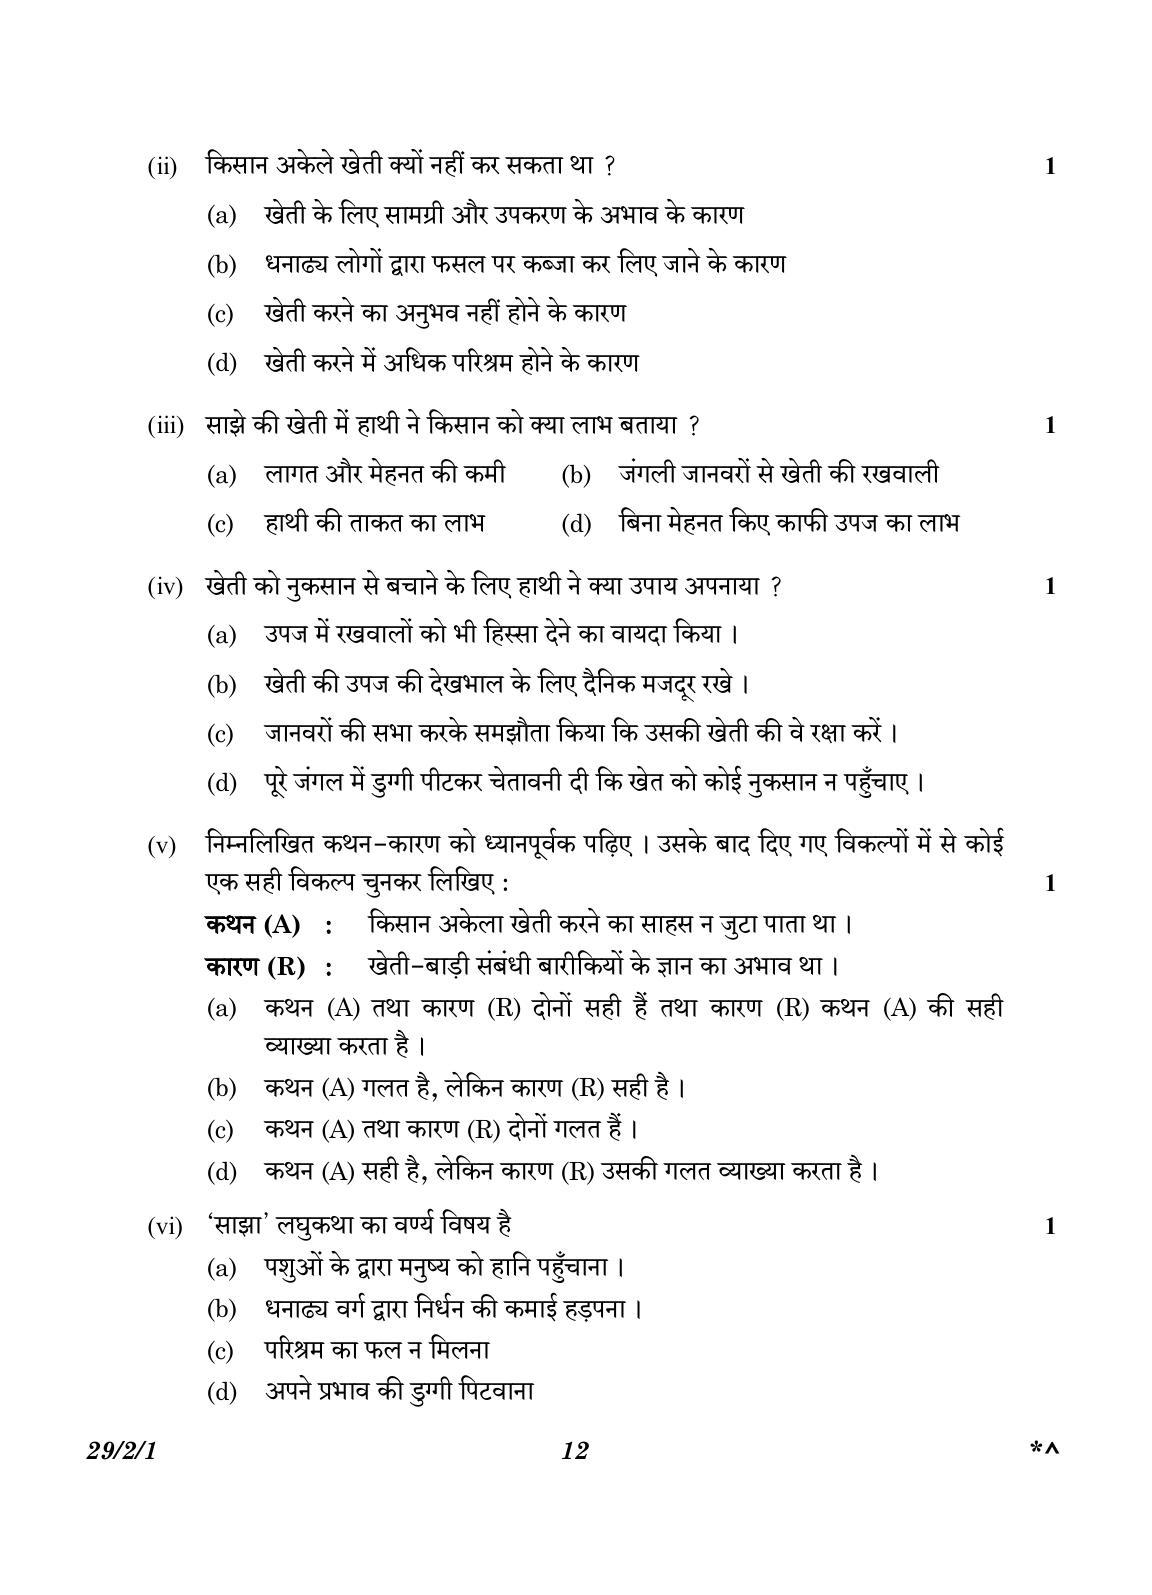 CBSE Class 12 29-2-1 Hindi Elective 2023 Question Paper - Page 12